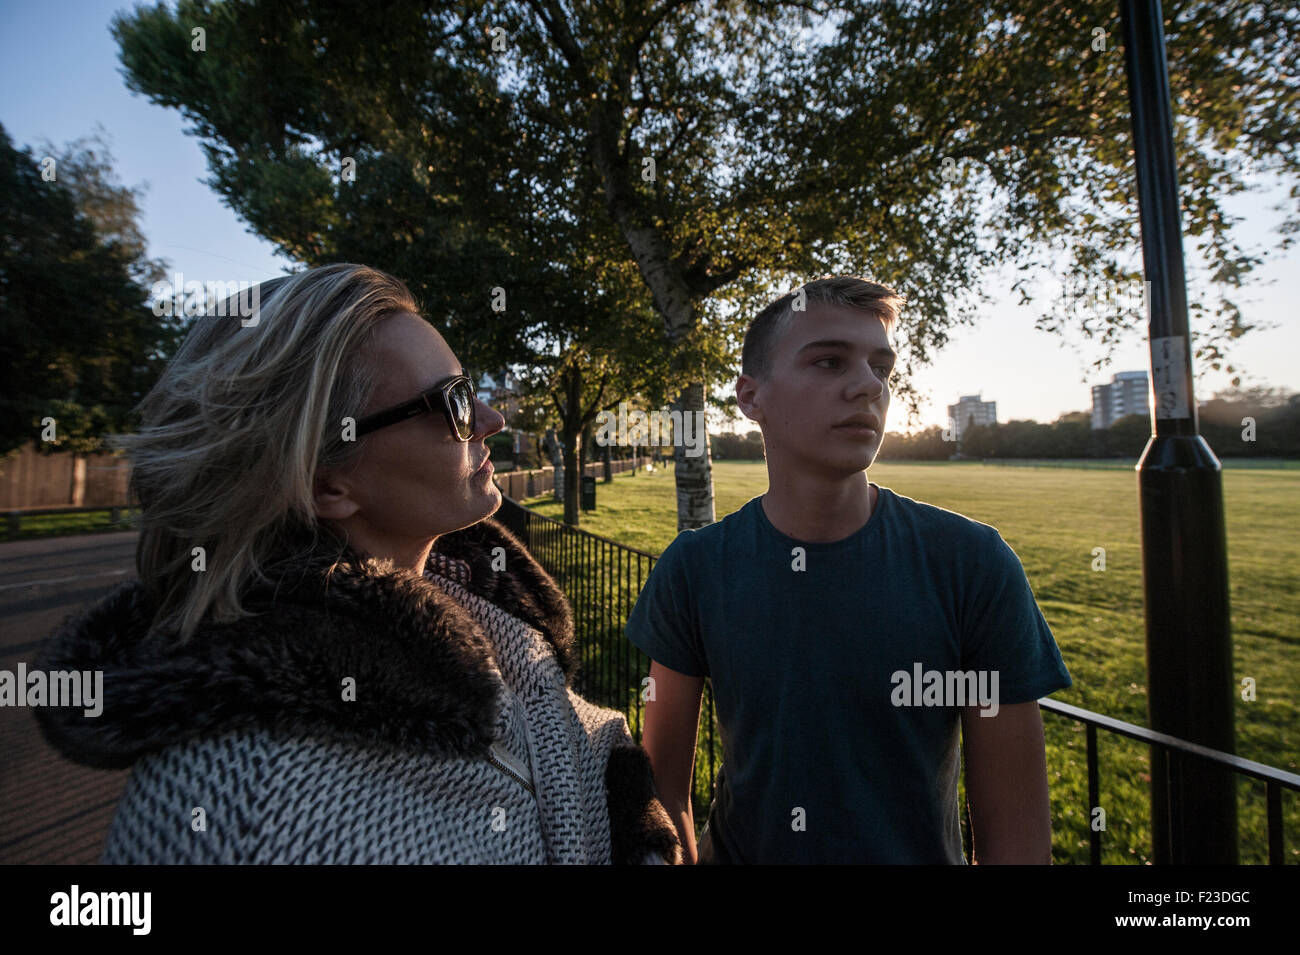 A glamorous mother and her son on a walk in a london park at dusk Stock Photo